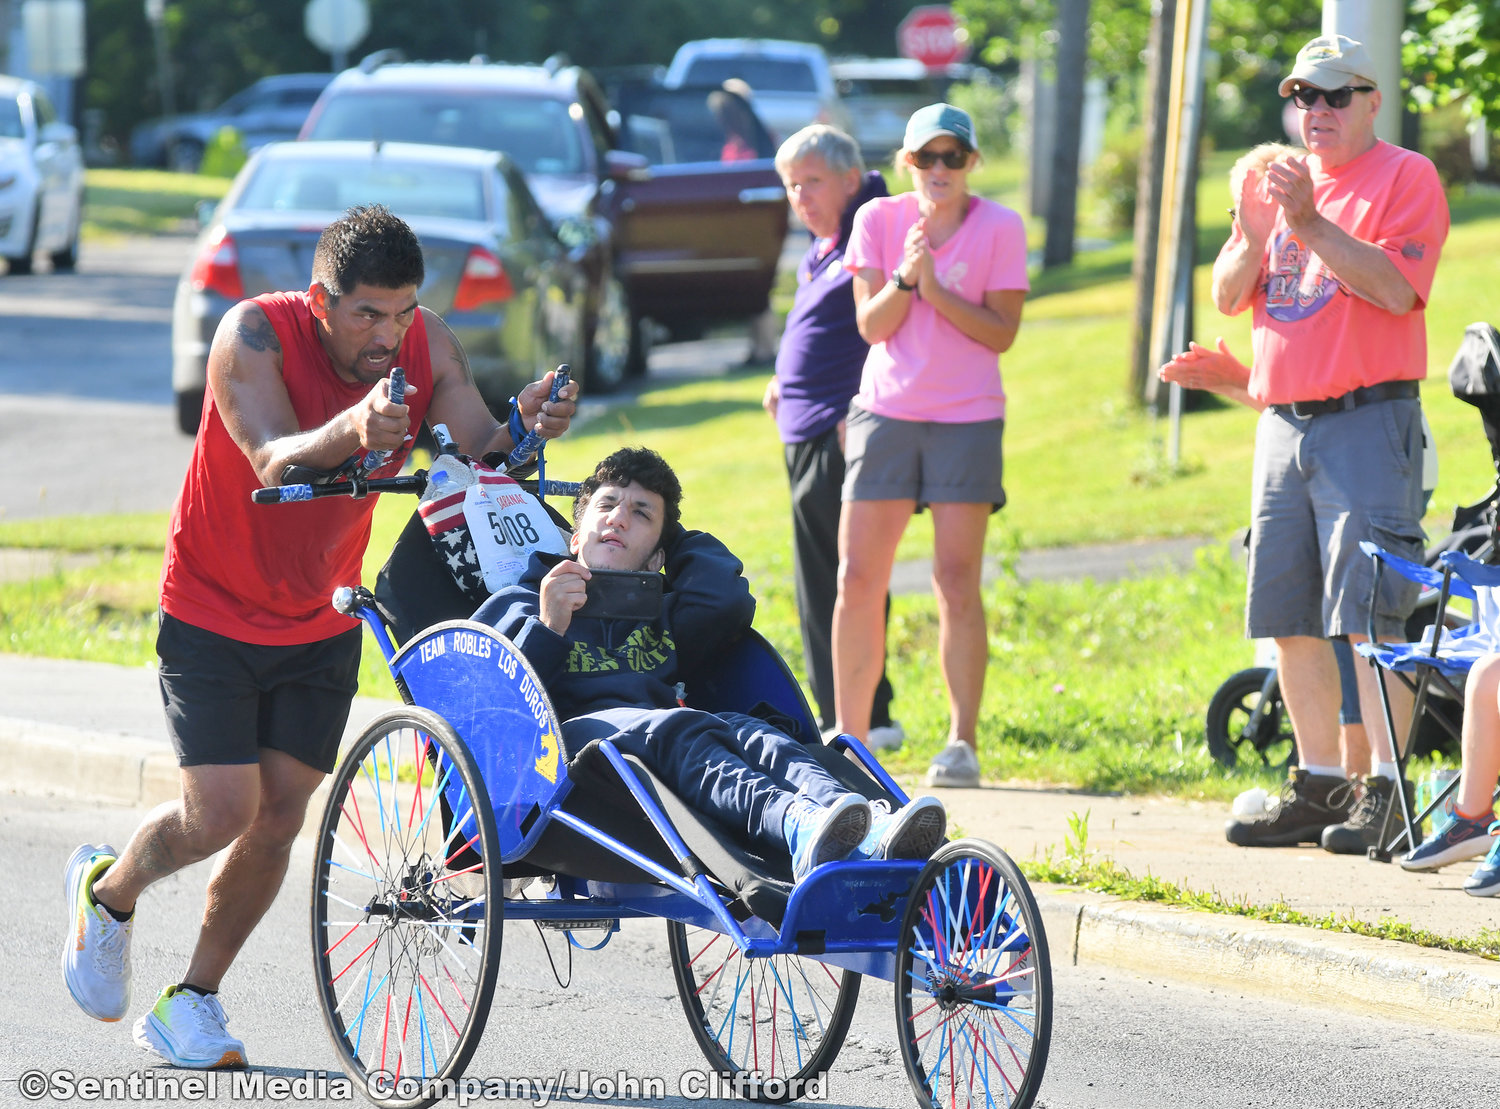 Wheelchair racer in the 45th Boilermaker Road Race makes the turn left from Memorial Parkway to Valley View Road.